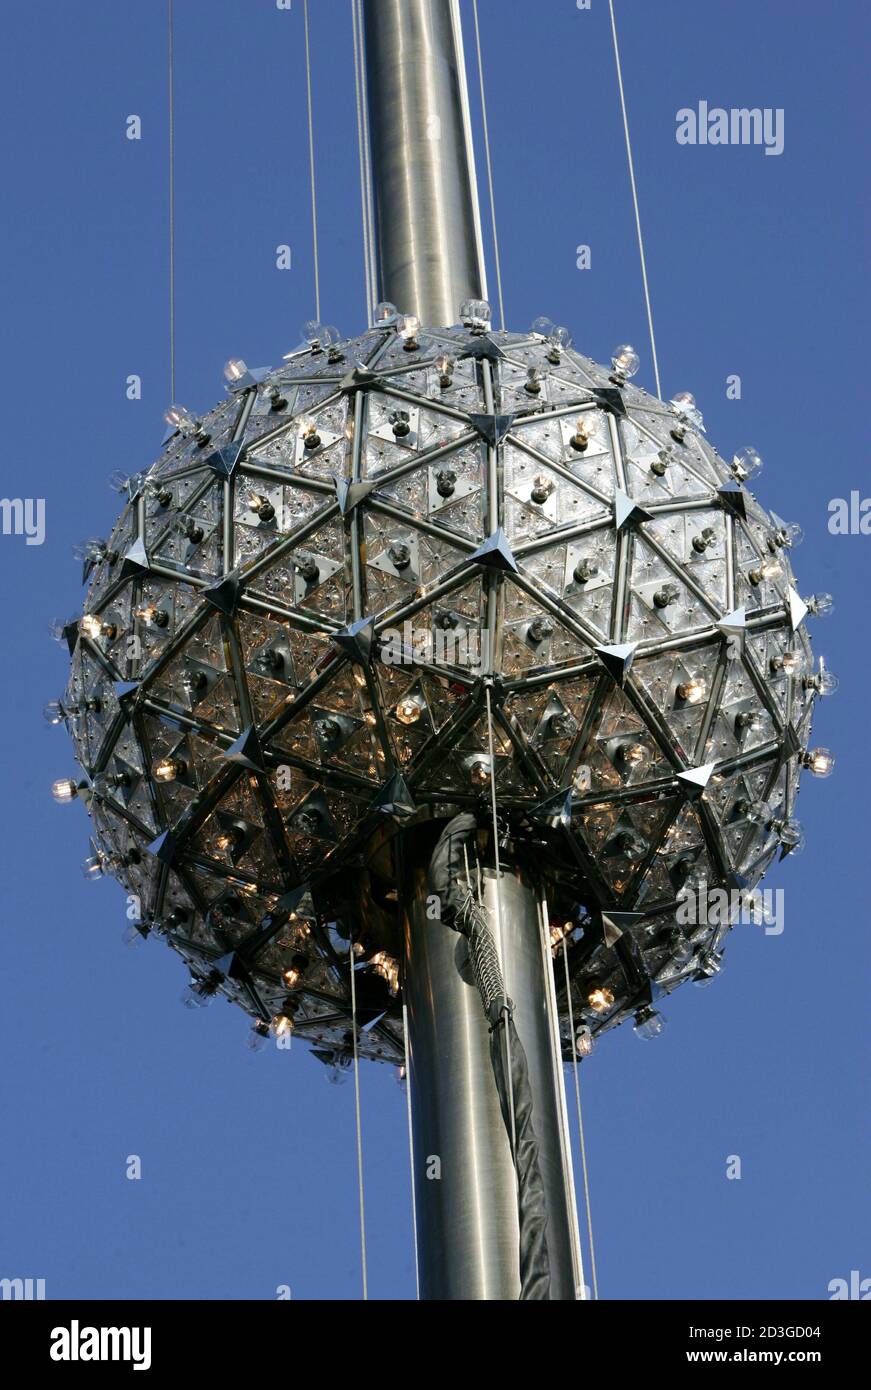 The Waterford Crystal Times Square ball is raised above 1 Times Square in  New York City, December 30, 2004, during a test for the annual New Year's  Eve midnight drop of the